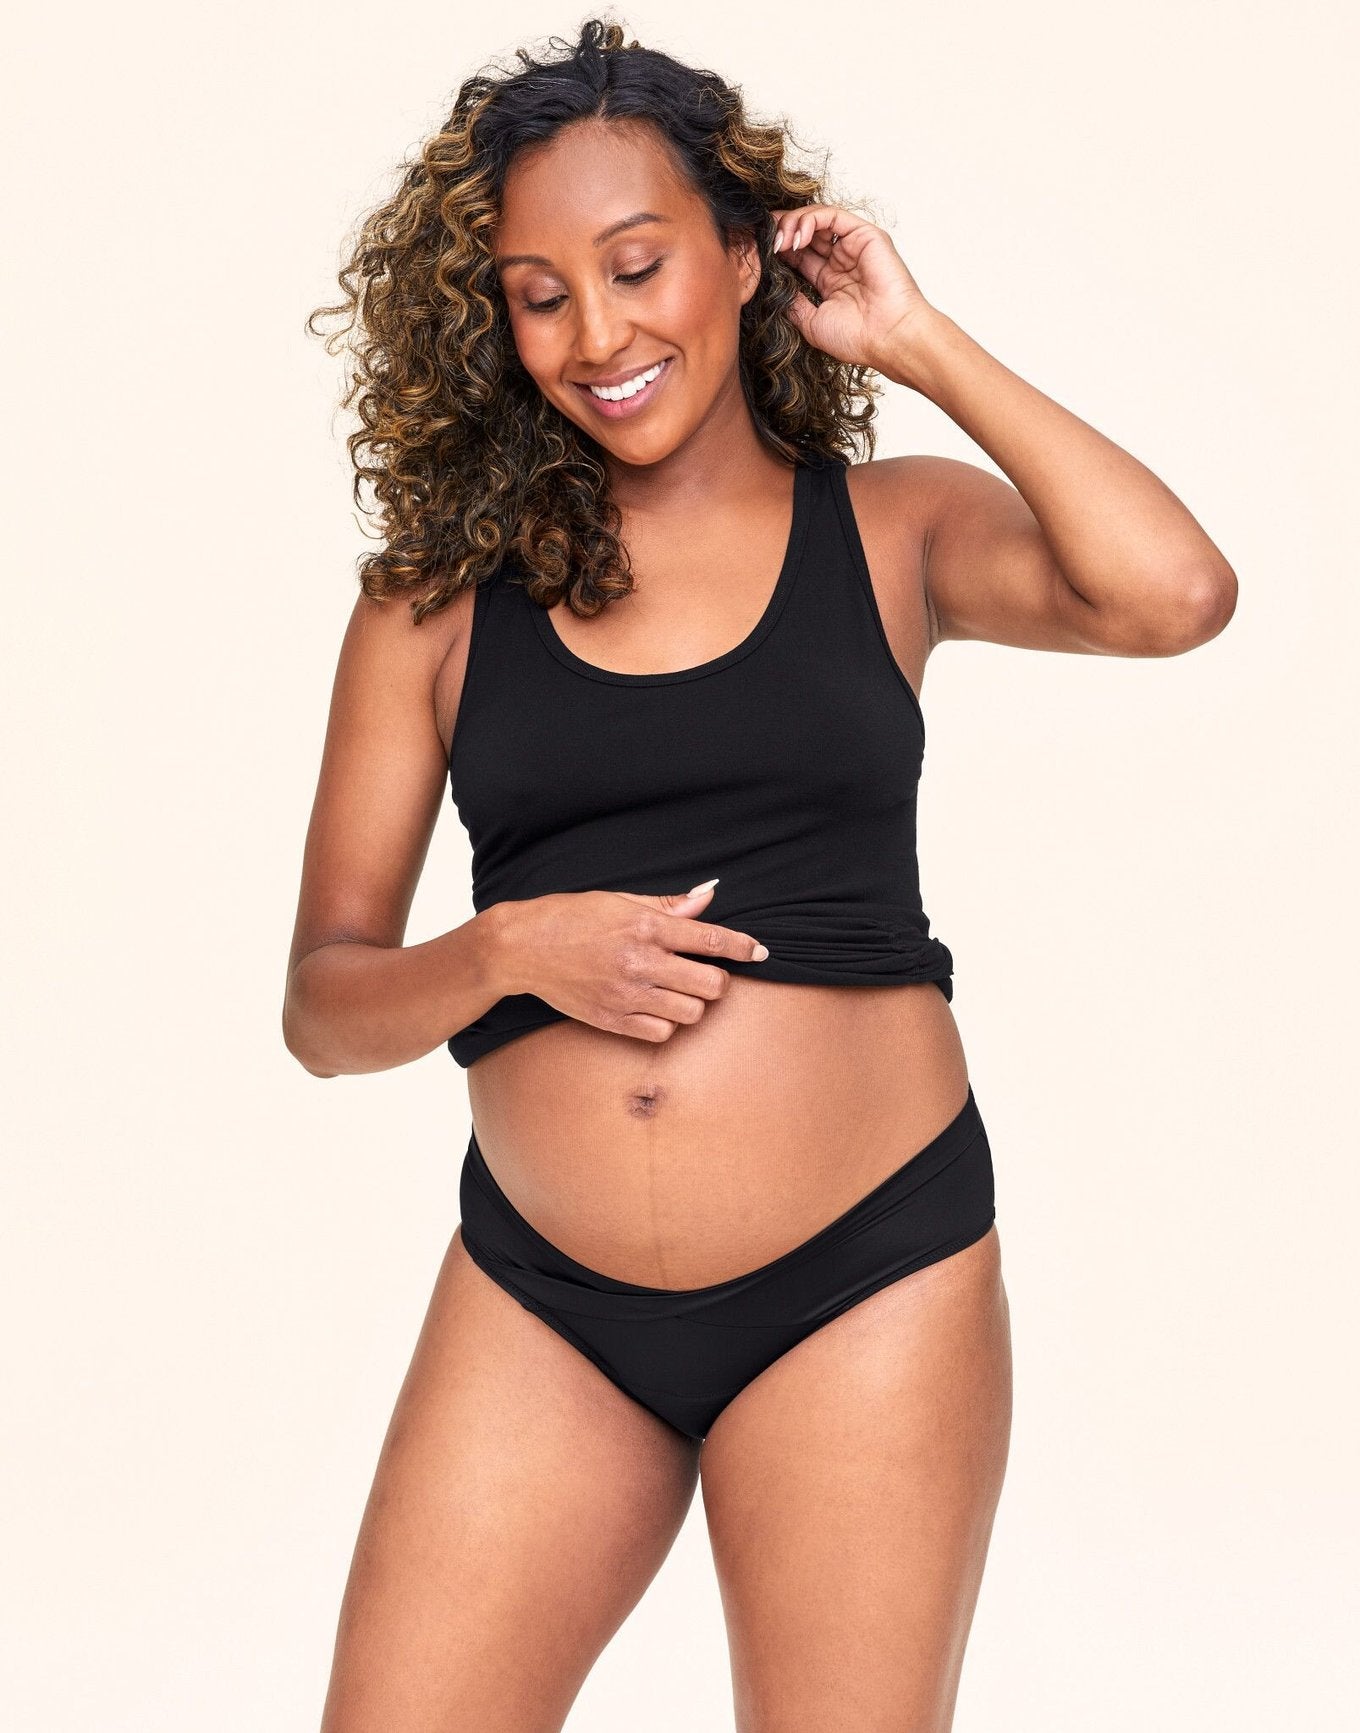 Elevate your Maternity Experience with bmama Maternity Panties